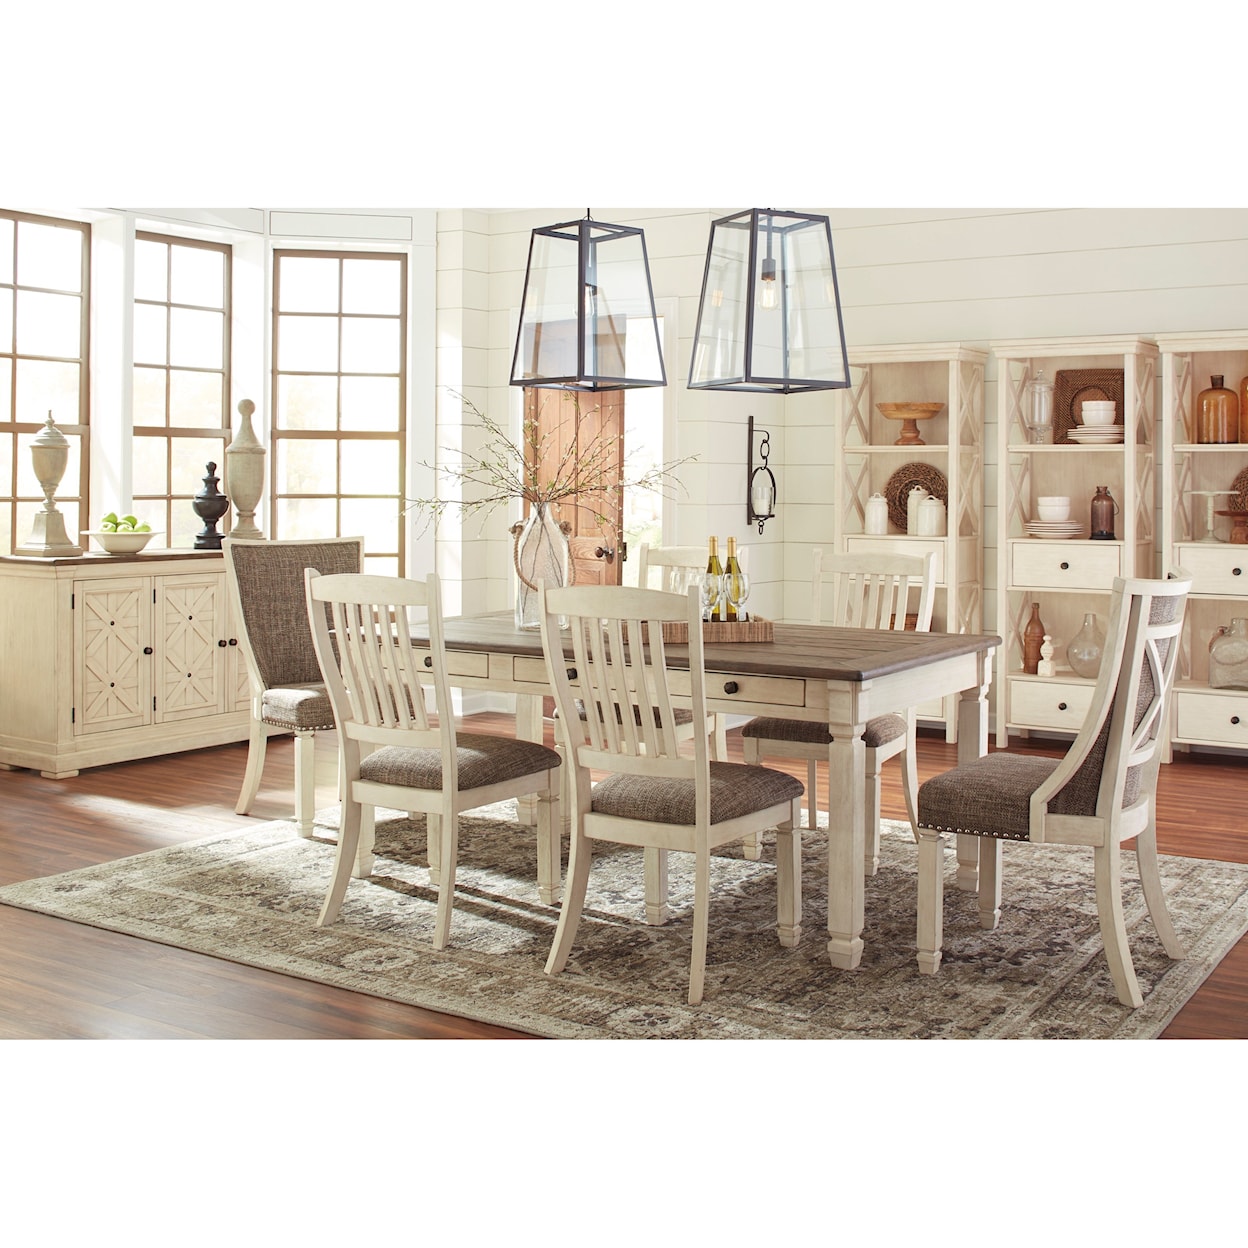 Signature Design by Ashley Bolanburg Formal Dining Room Group